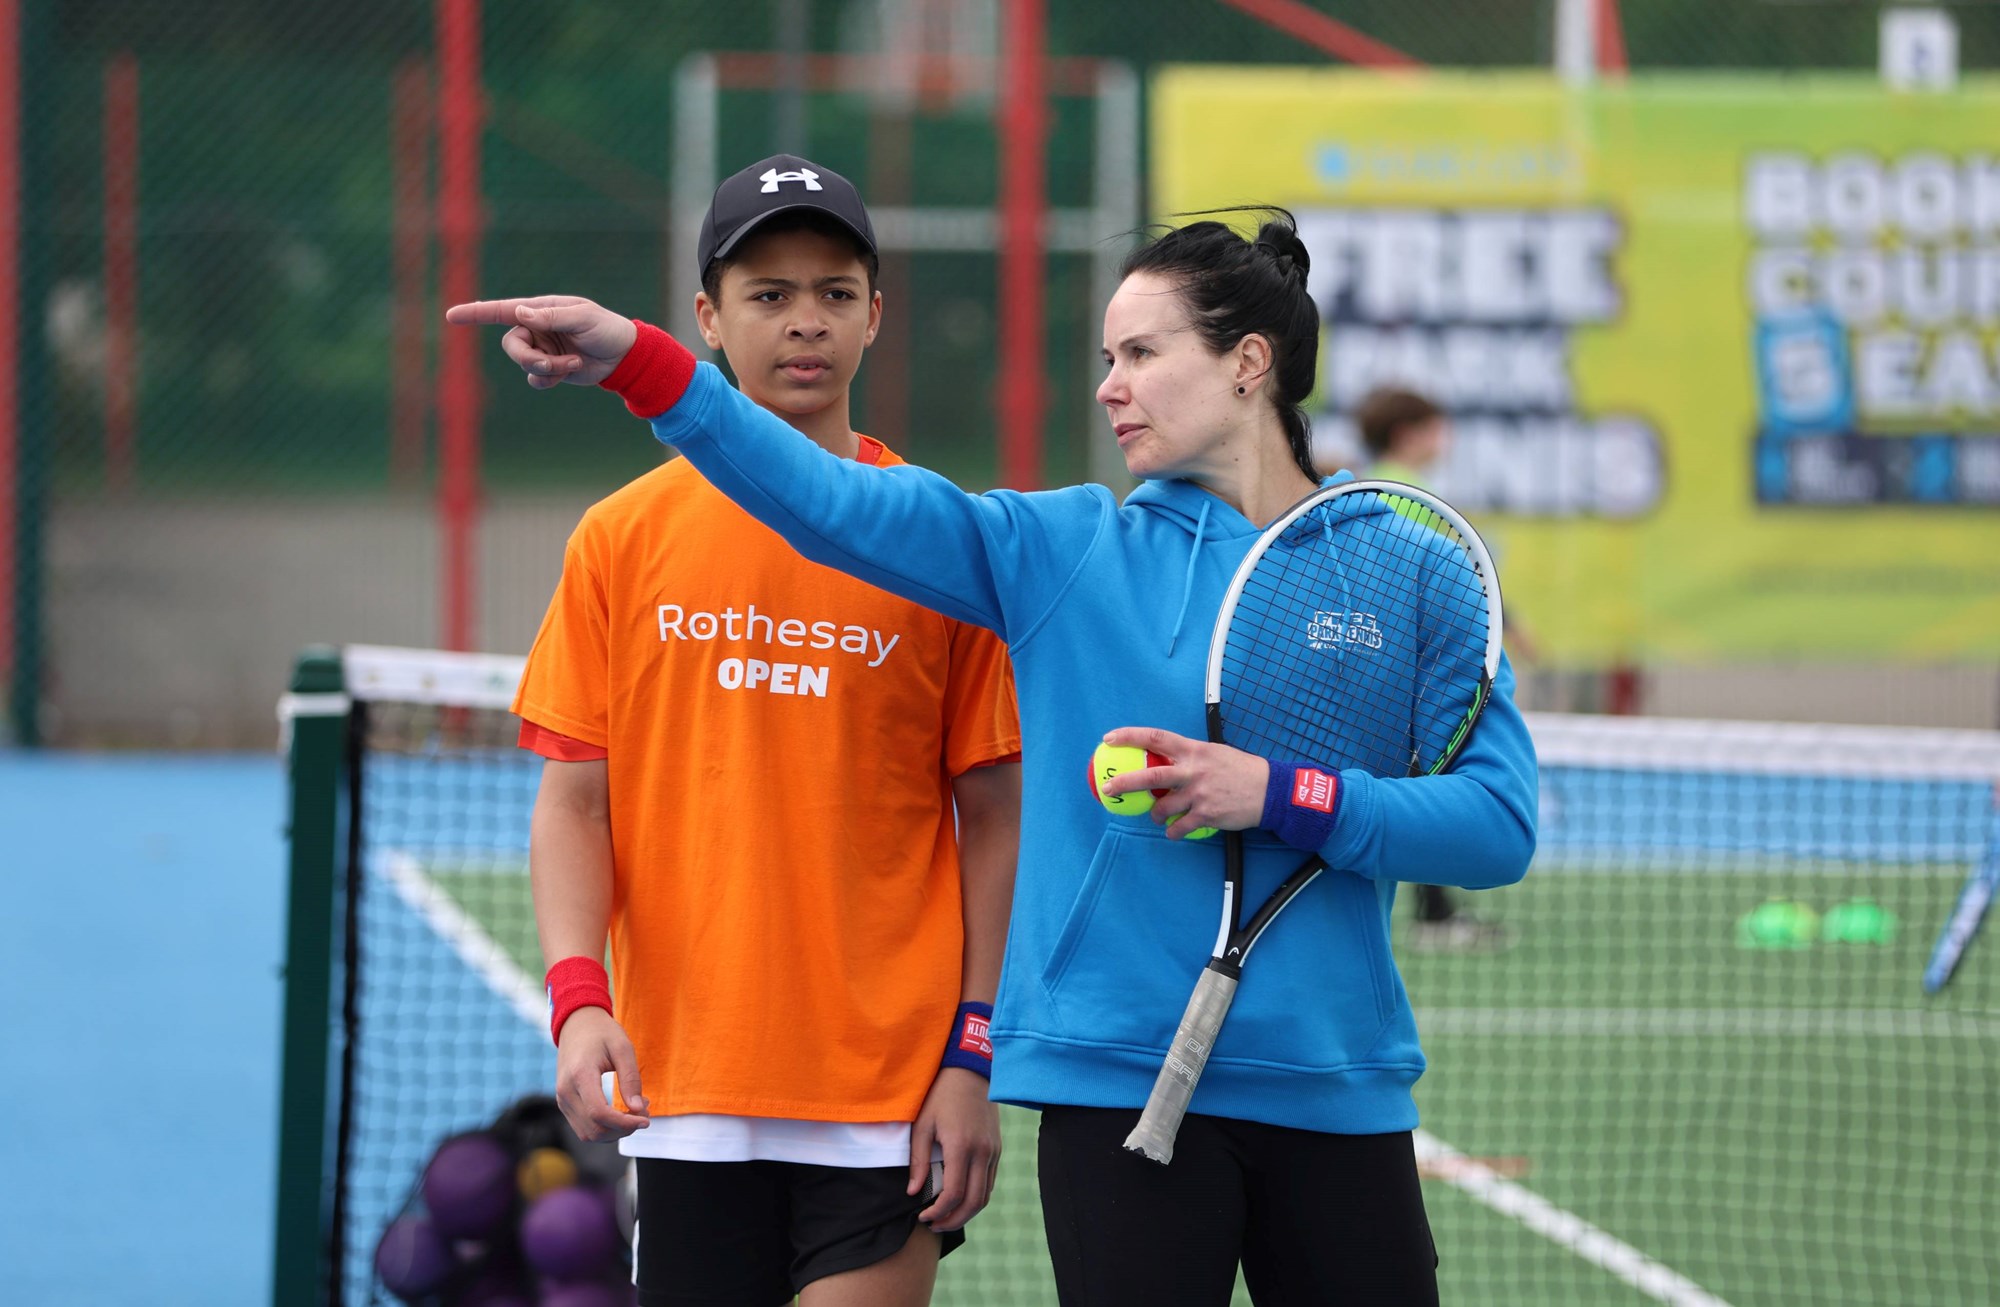 A Free Parks Tennis Activator holding a tennis racket and ball while talking to a young boy wearing a Rothesay Open t-shirt